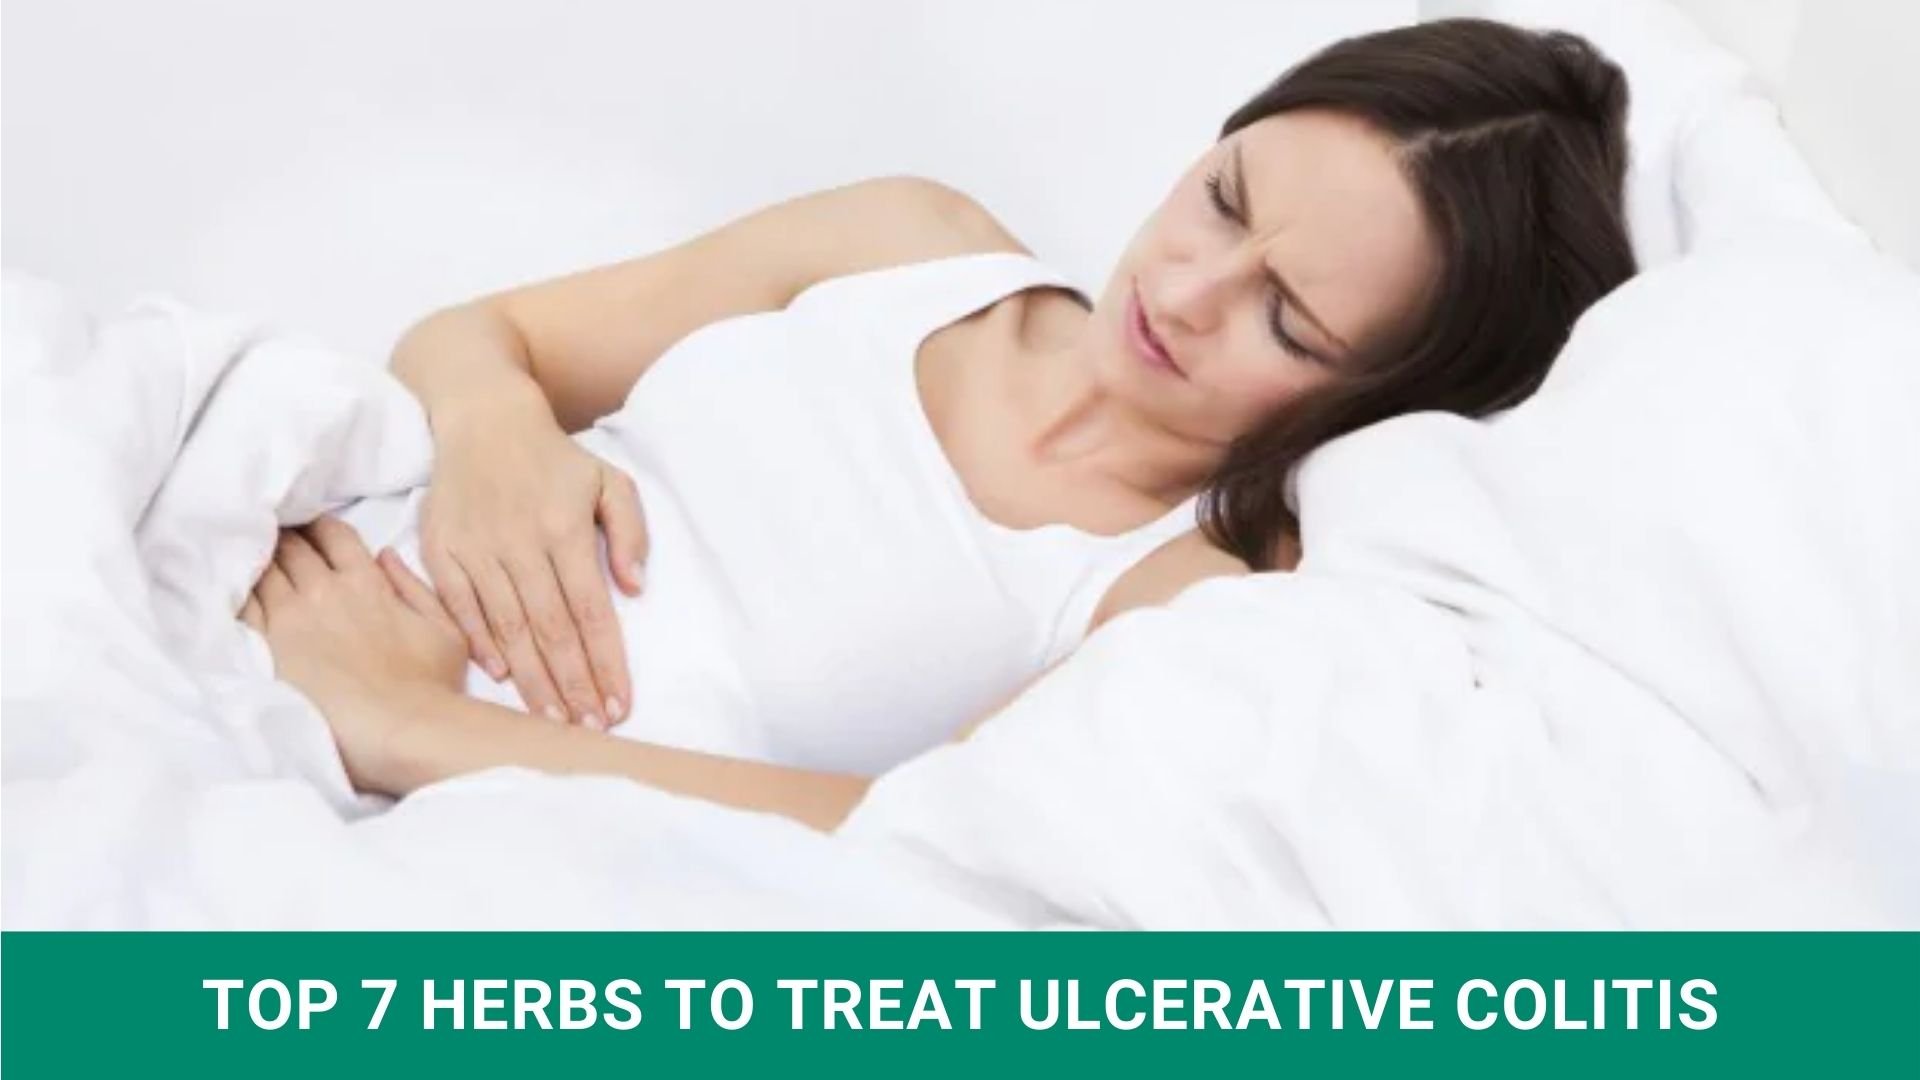 Herbs to Treat Ulcerative Colitis